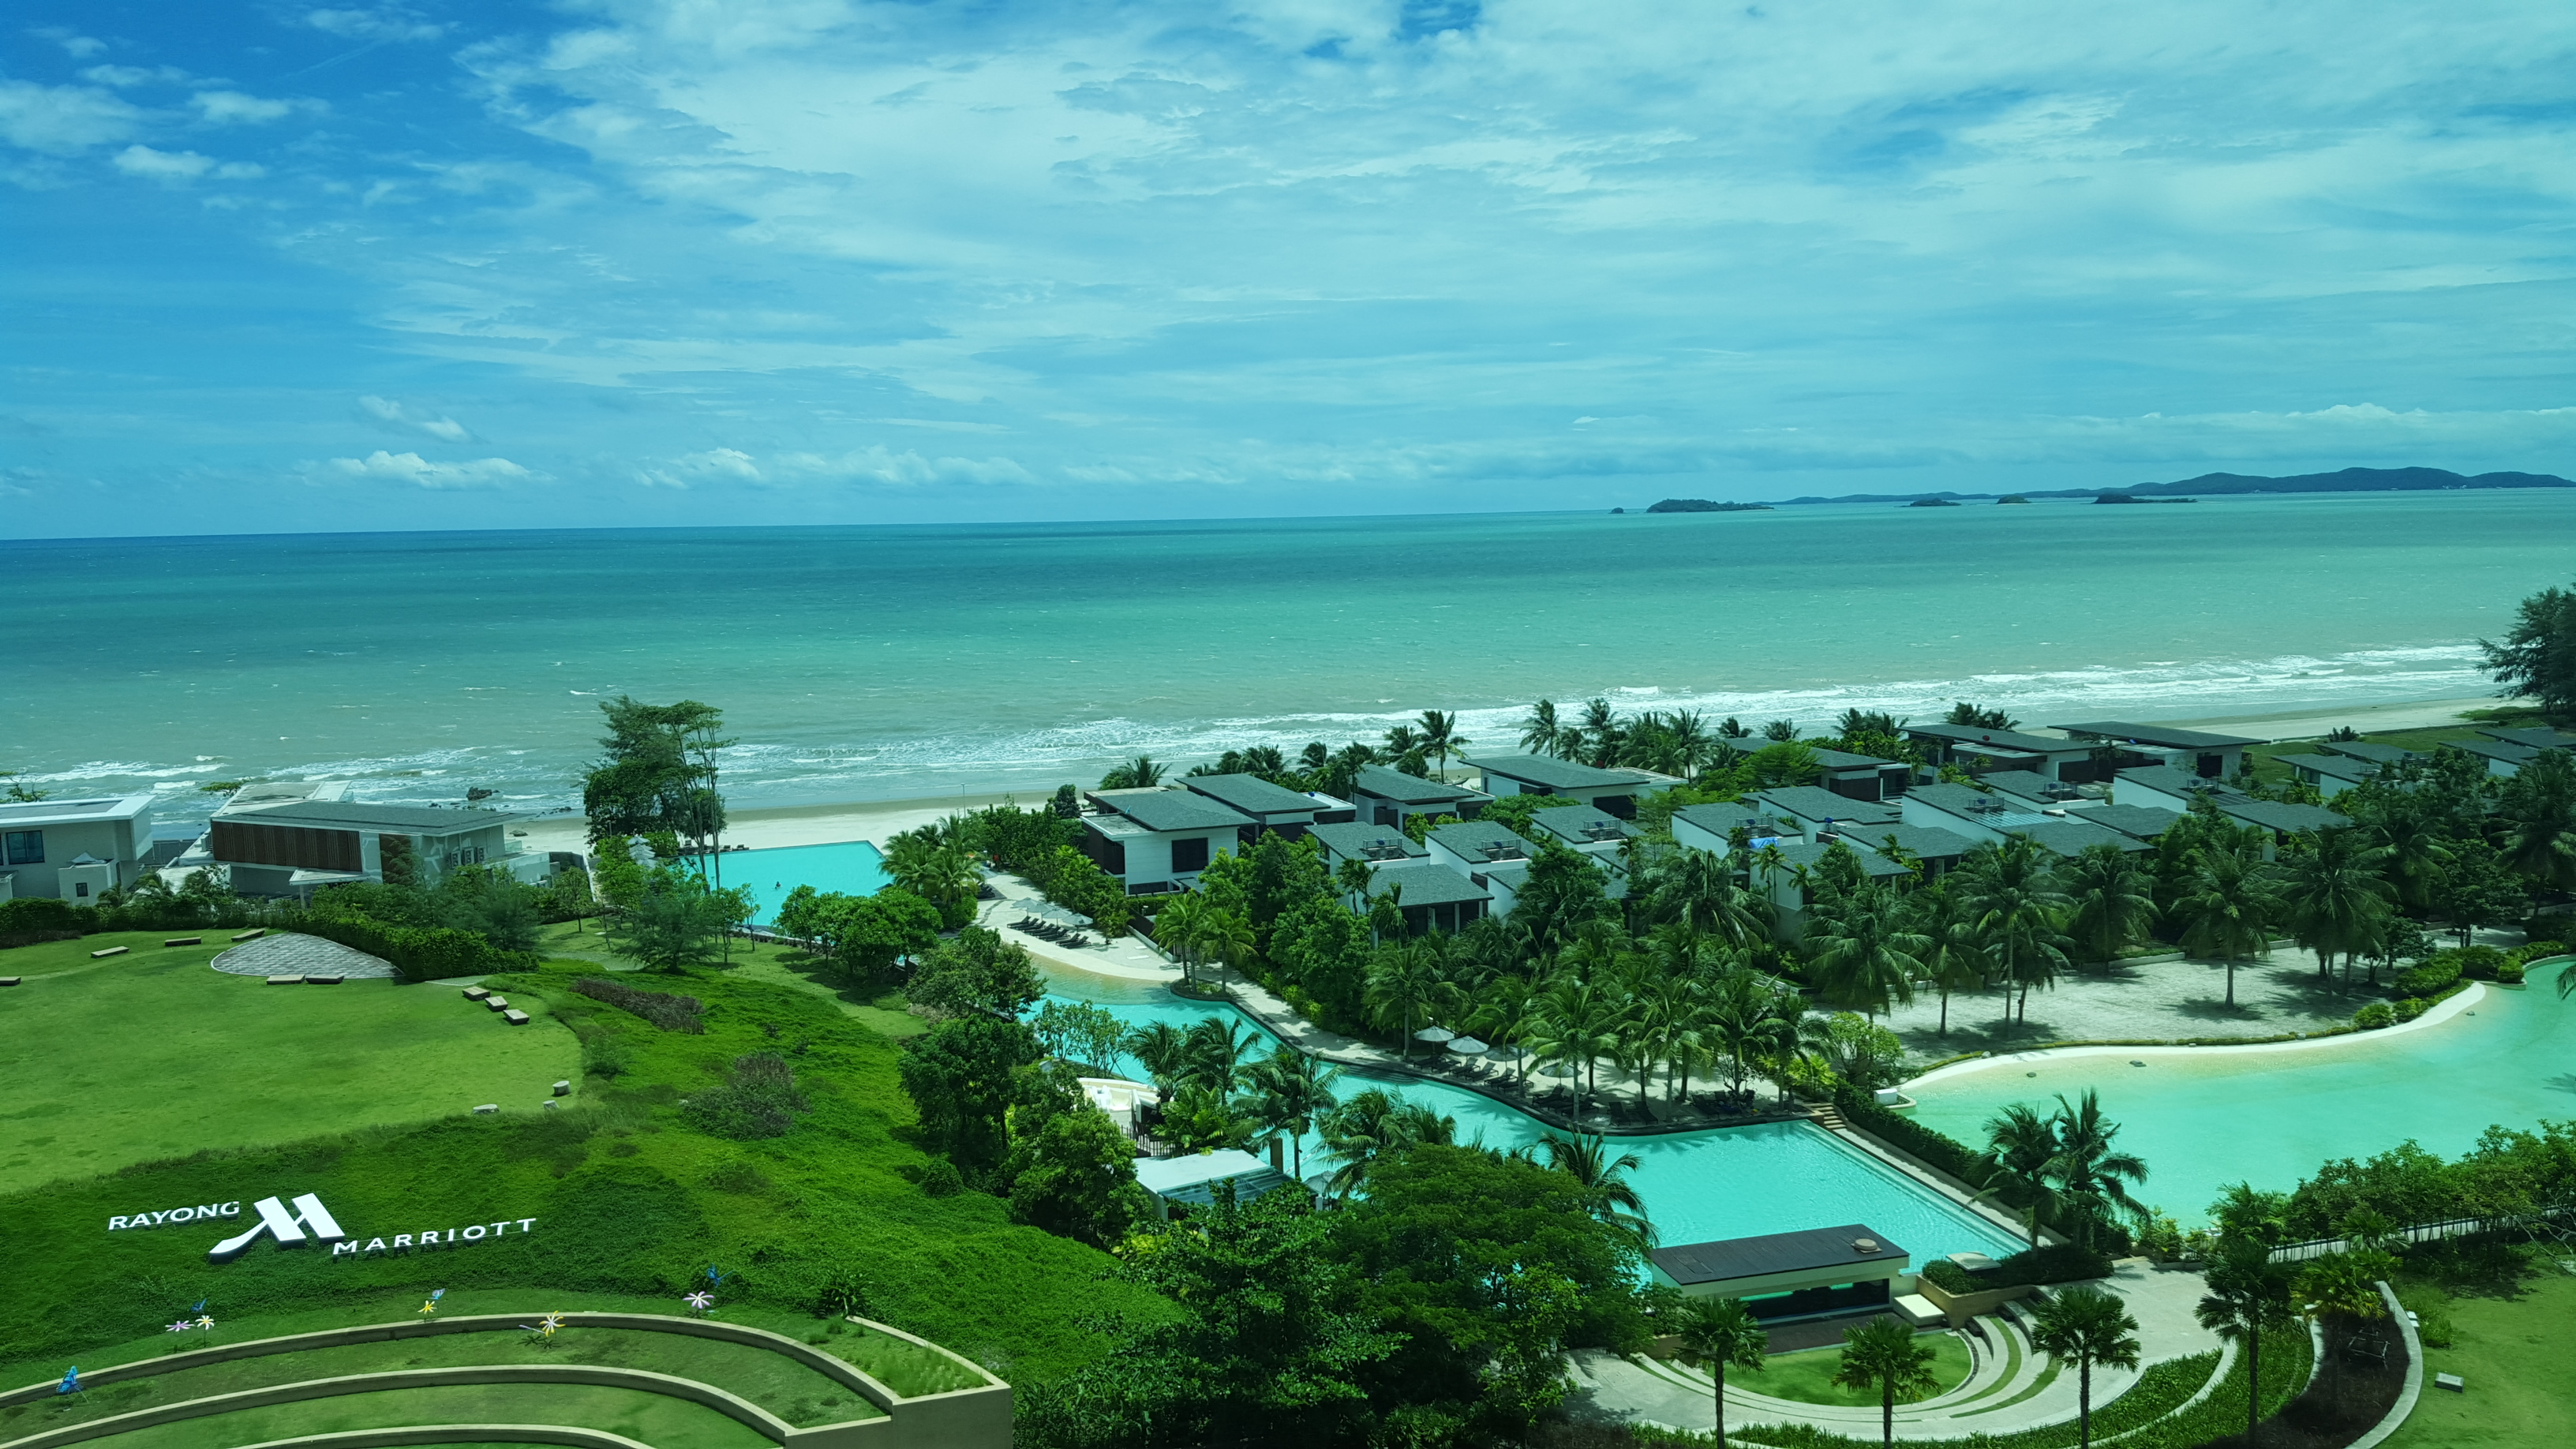 Marriott Rayong view